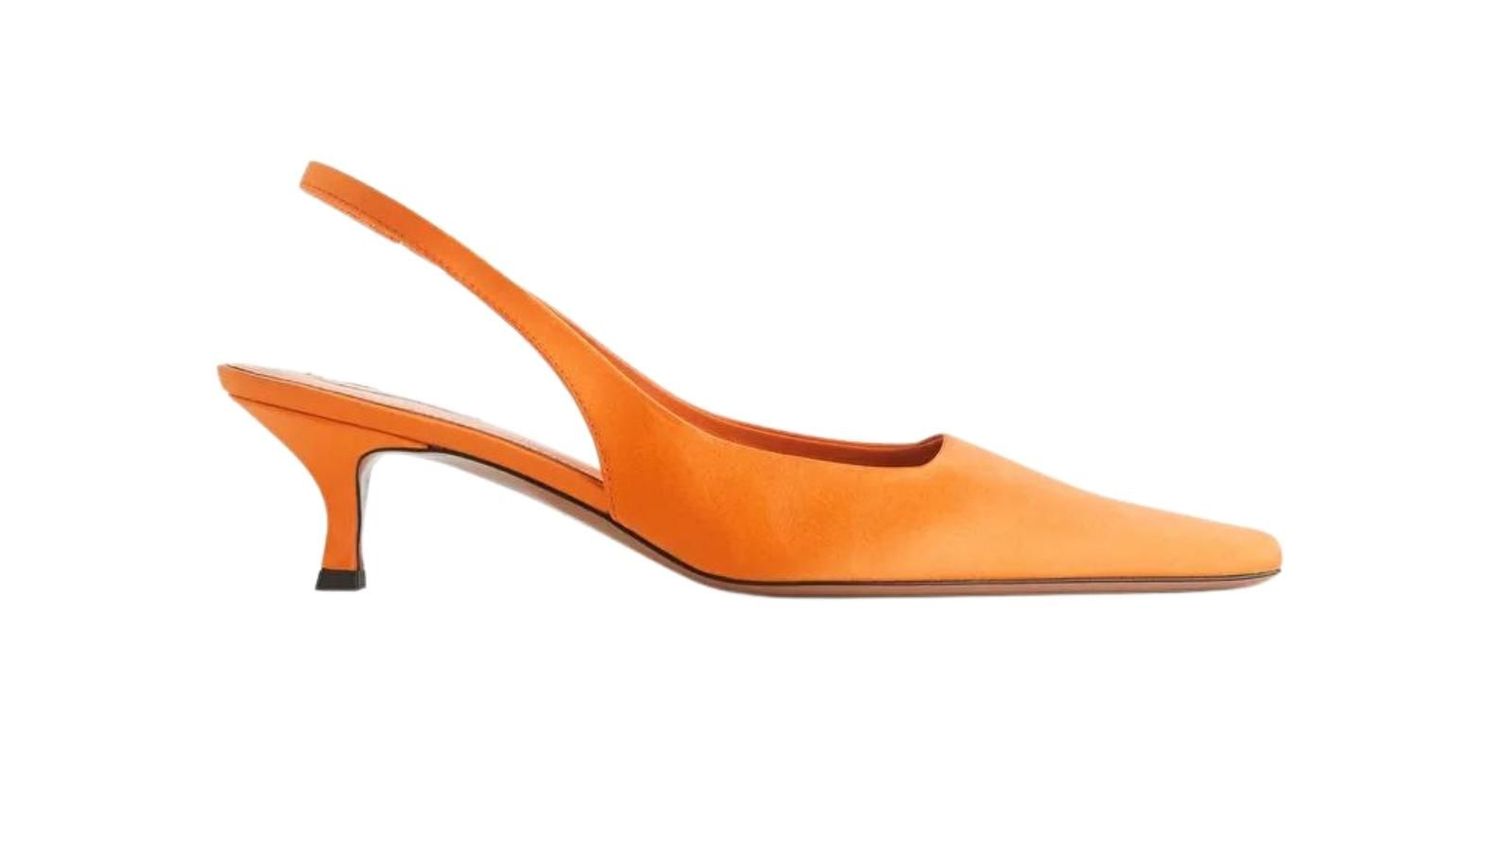 These are the heels guaranteed to take you painlessly through the night ...